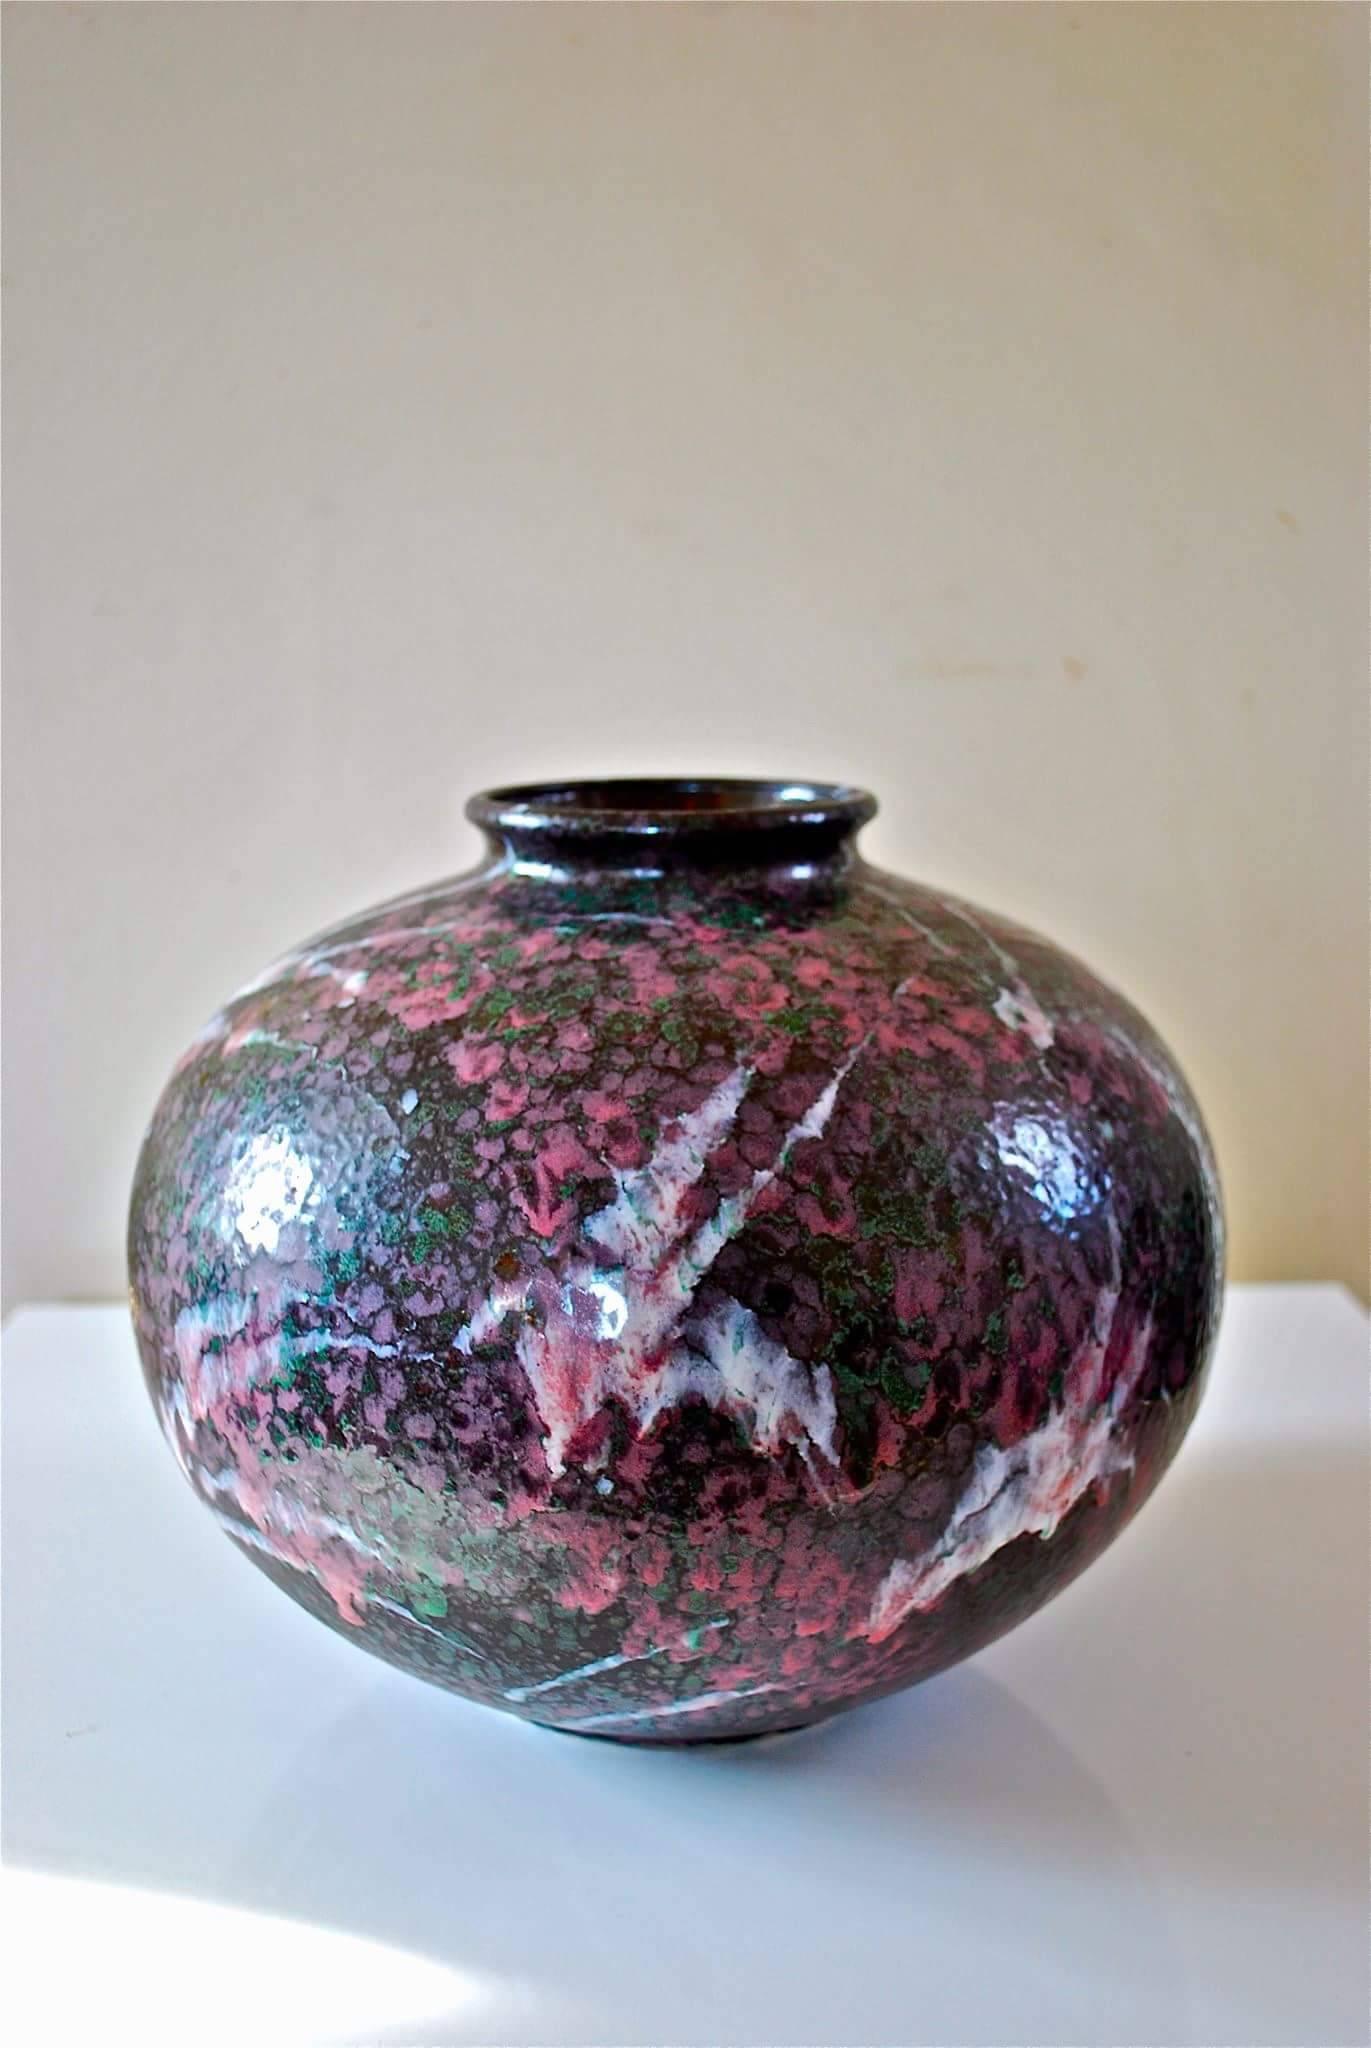 West Germany pottery vase by Ruscha.
Number 858, very rare as not many on the market.